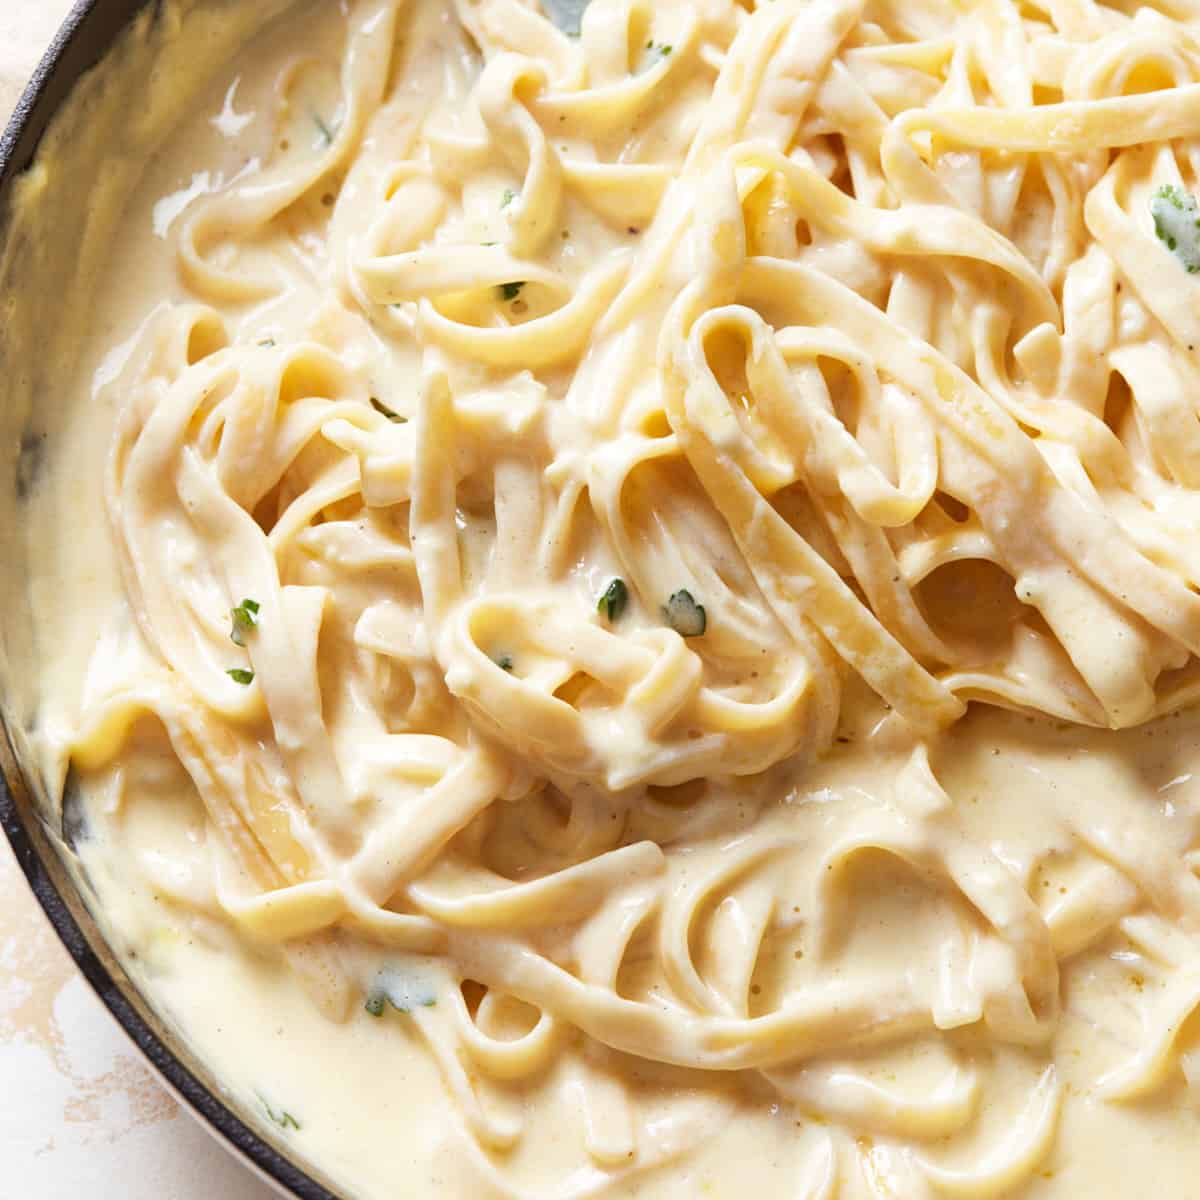 "Deliciously Creamy: The Alfredo Sauce Recipe You Need to Try!"